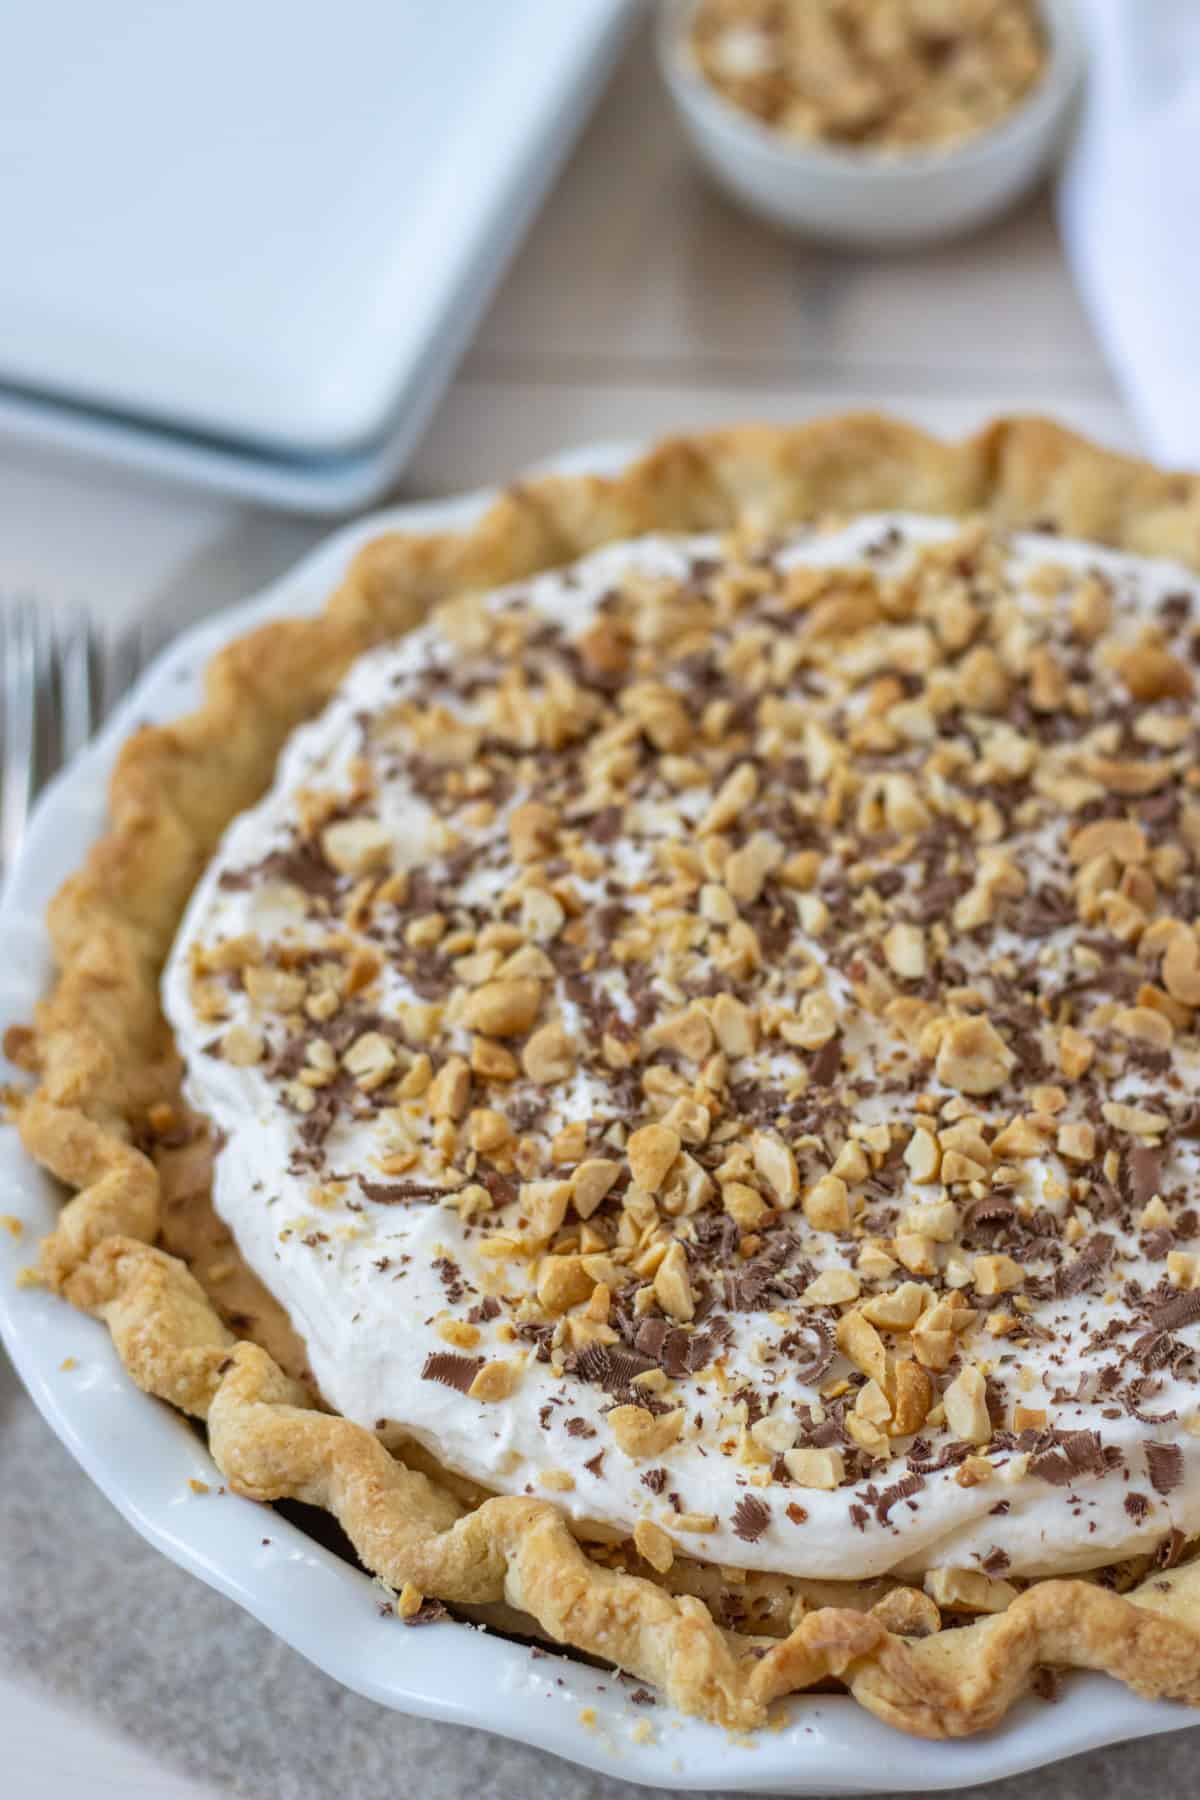 Peanut butter pie in a pie plate with plates and a bowl of peanuts in the background.